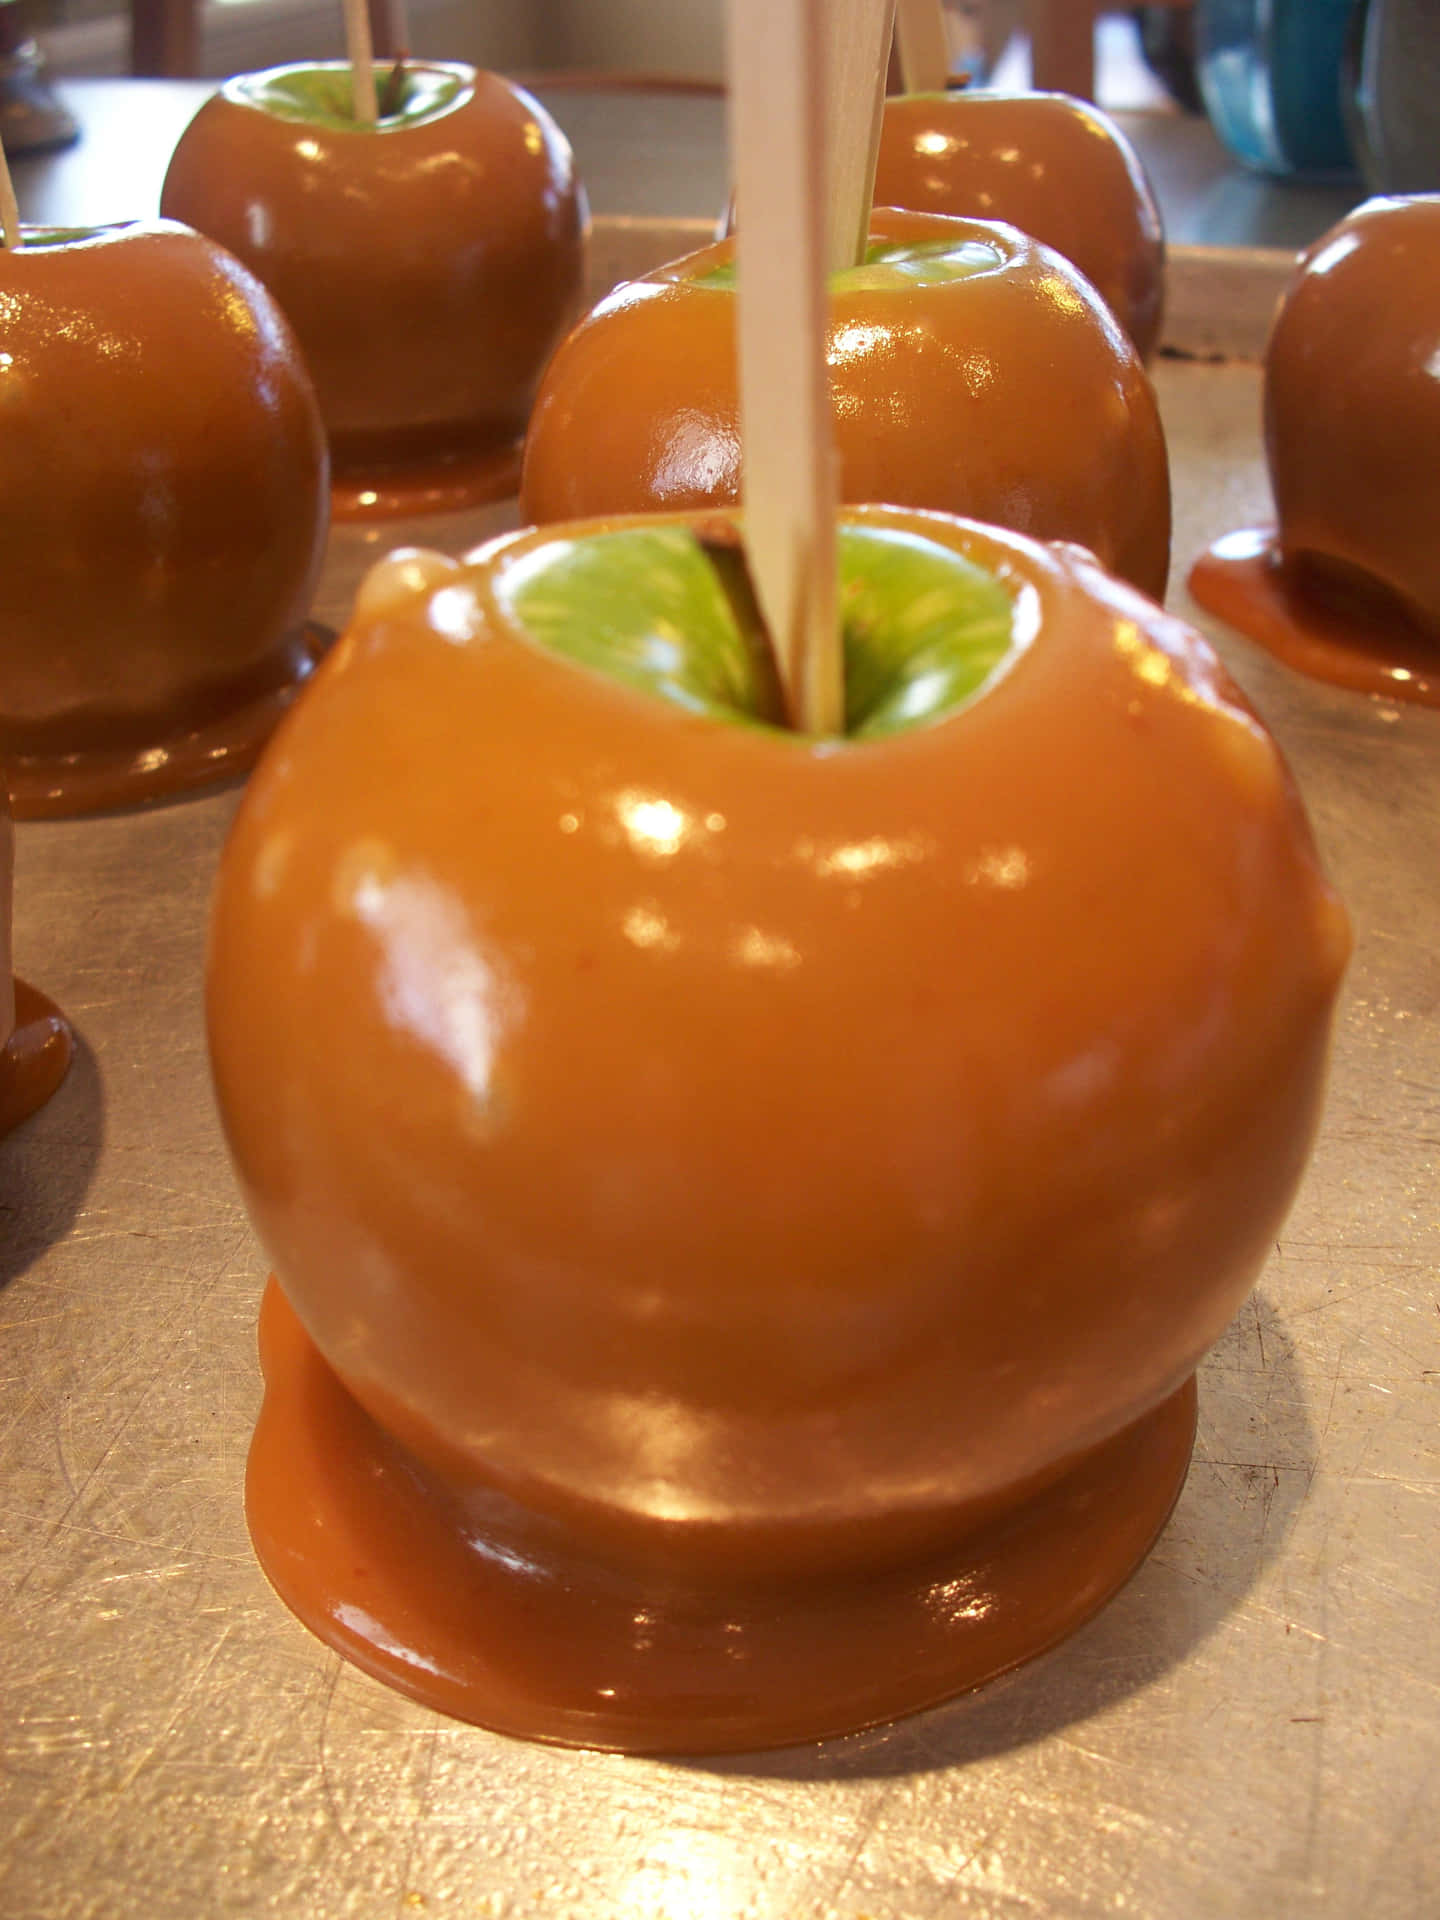 Delectable Caramel Apples on a Wood Table Wallpaper